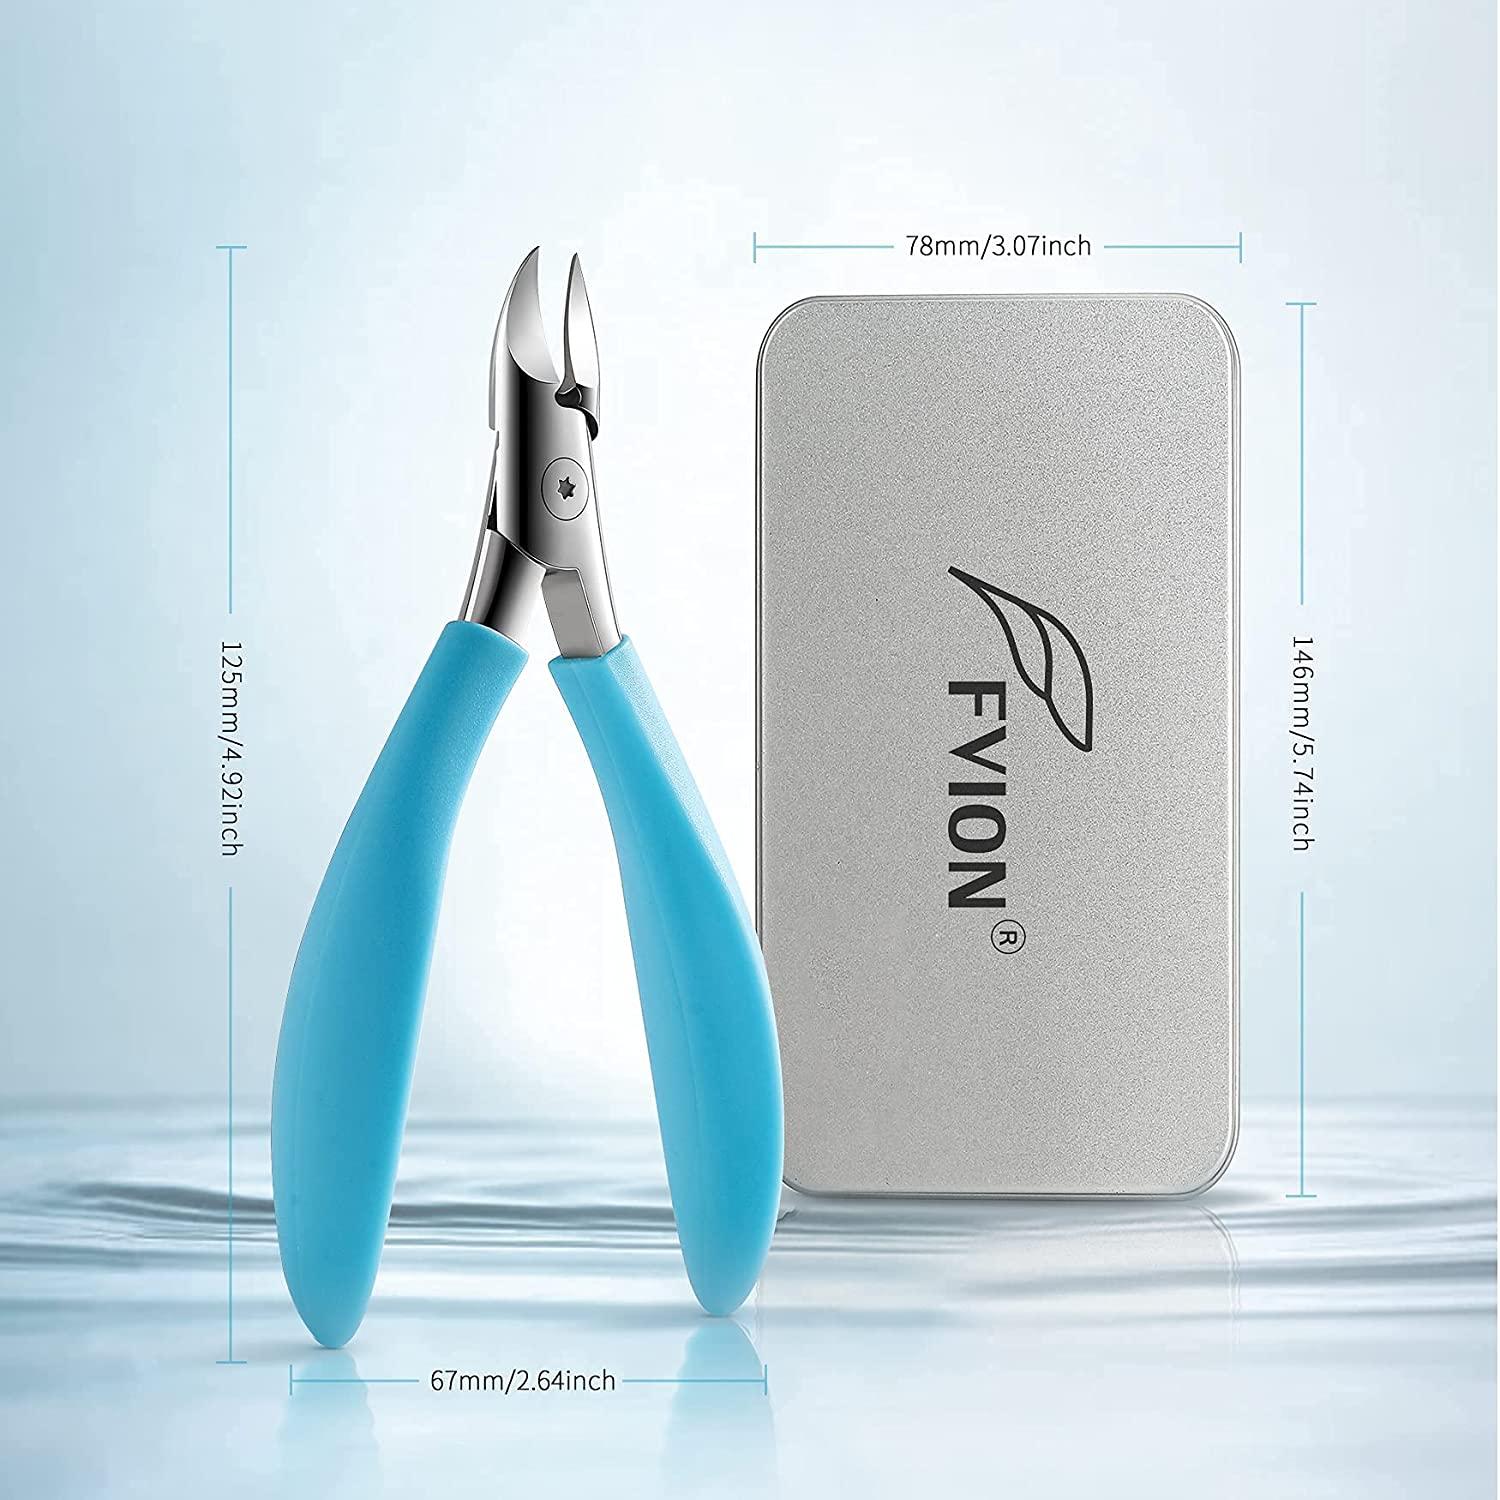 Podiatrist Toenail Clippers,professional Ingrown Or Thick Toe Nail